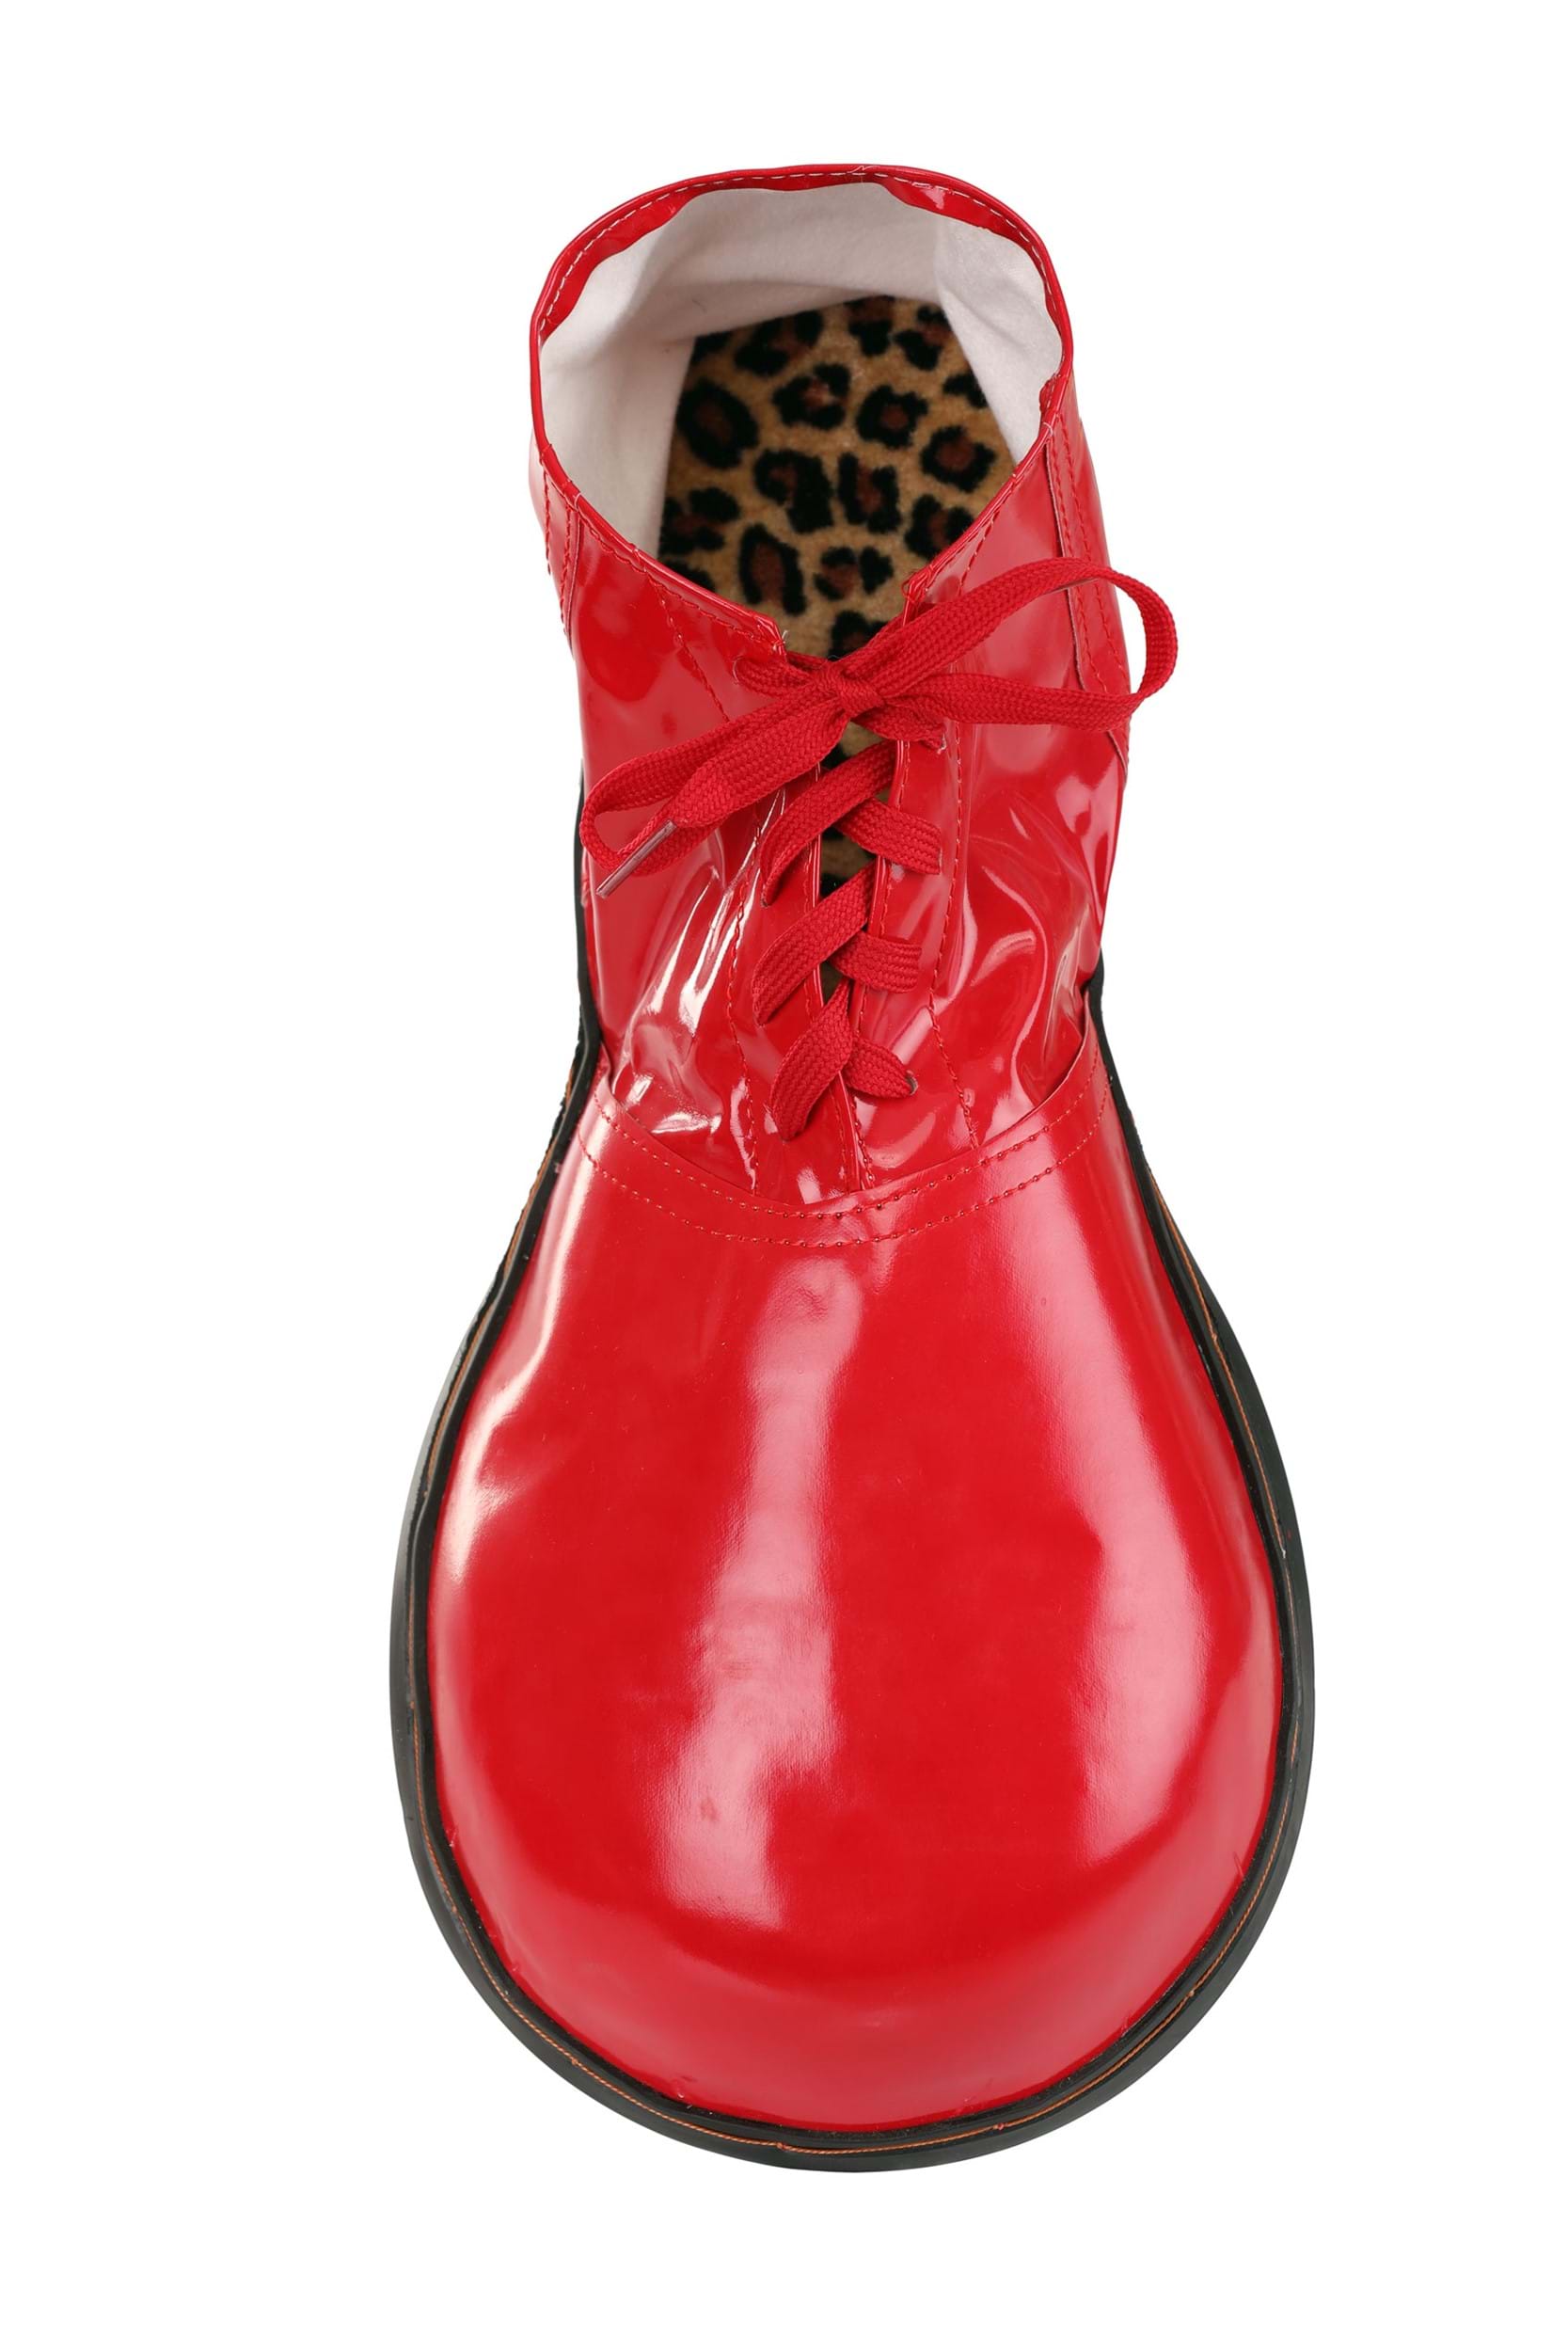 Red Clown Shoes , Costume Accessories